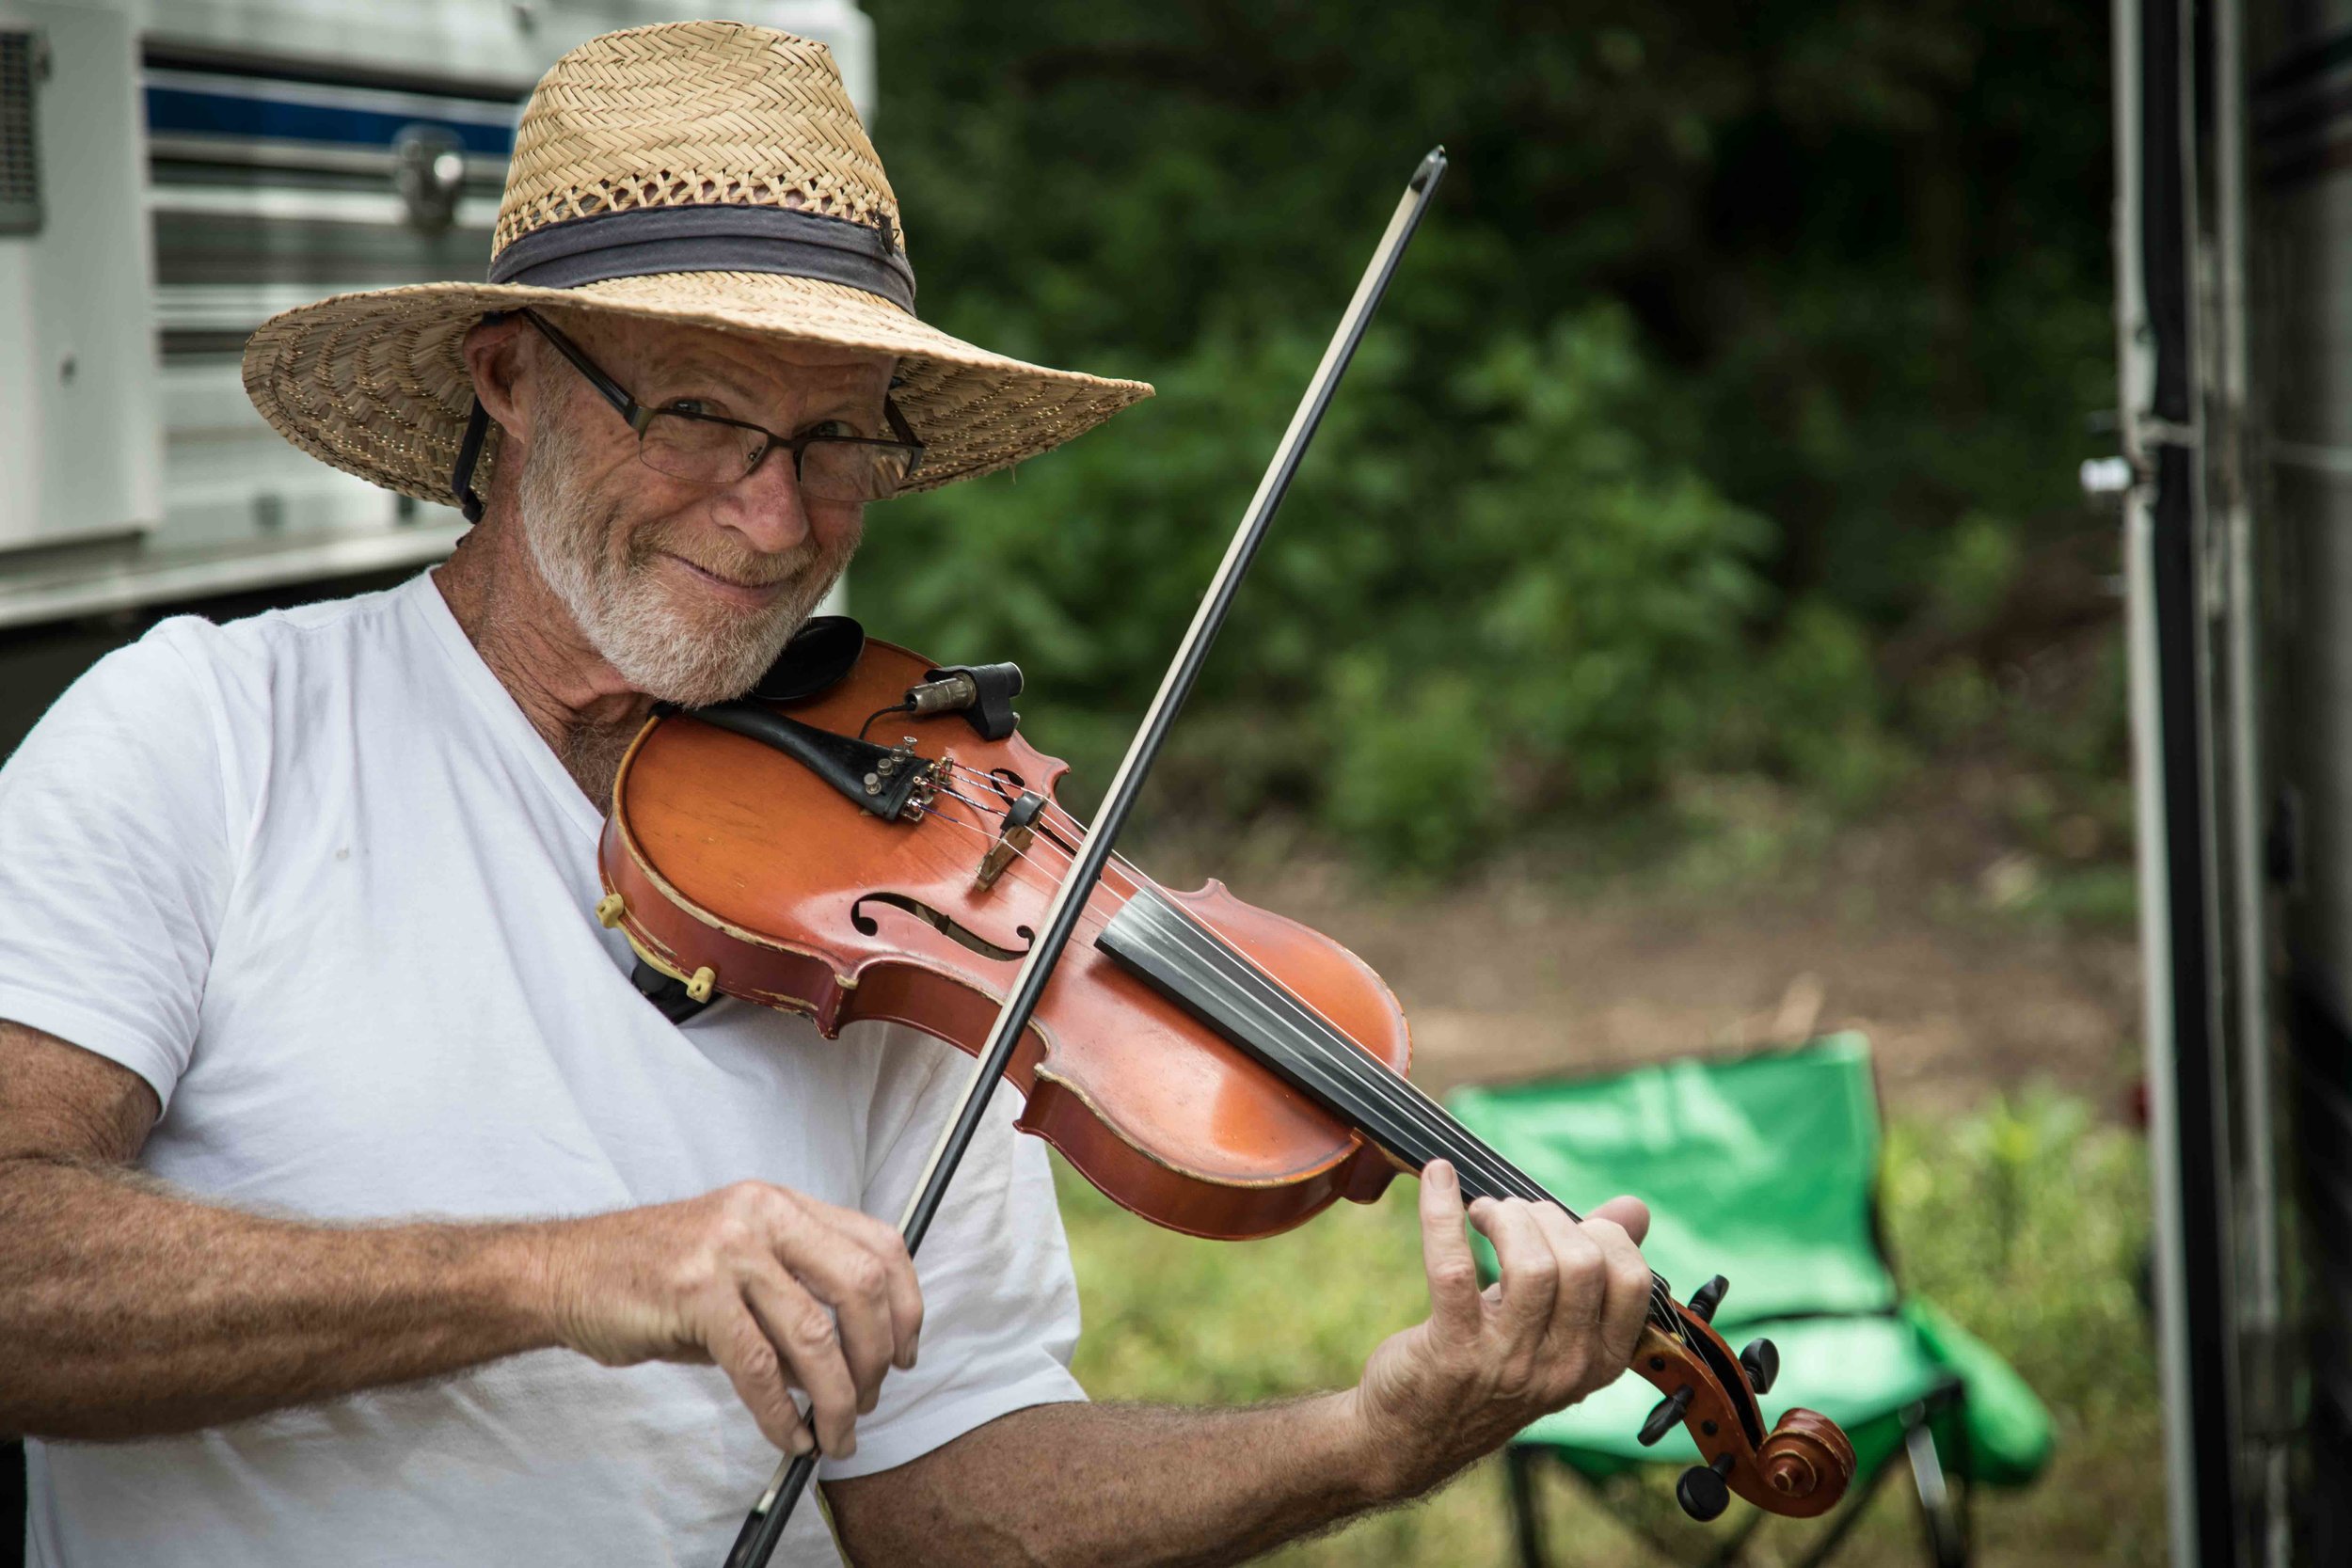  Festival goers bring their own instruments to jam with their tent neighbors 